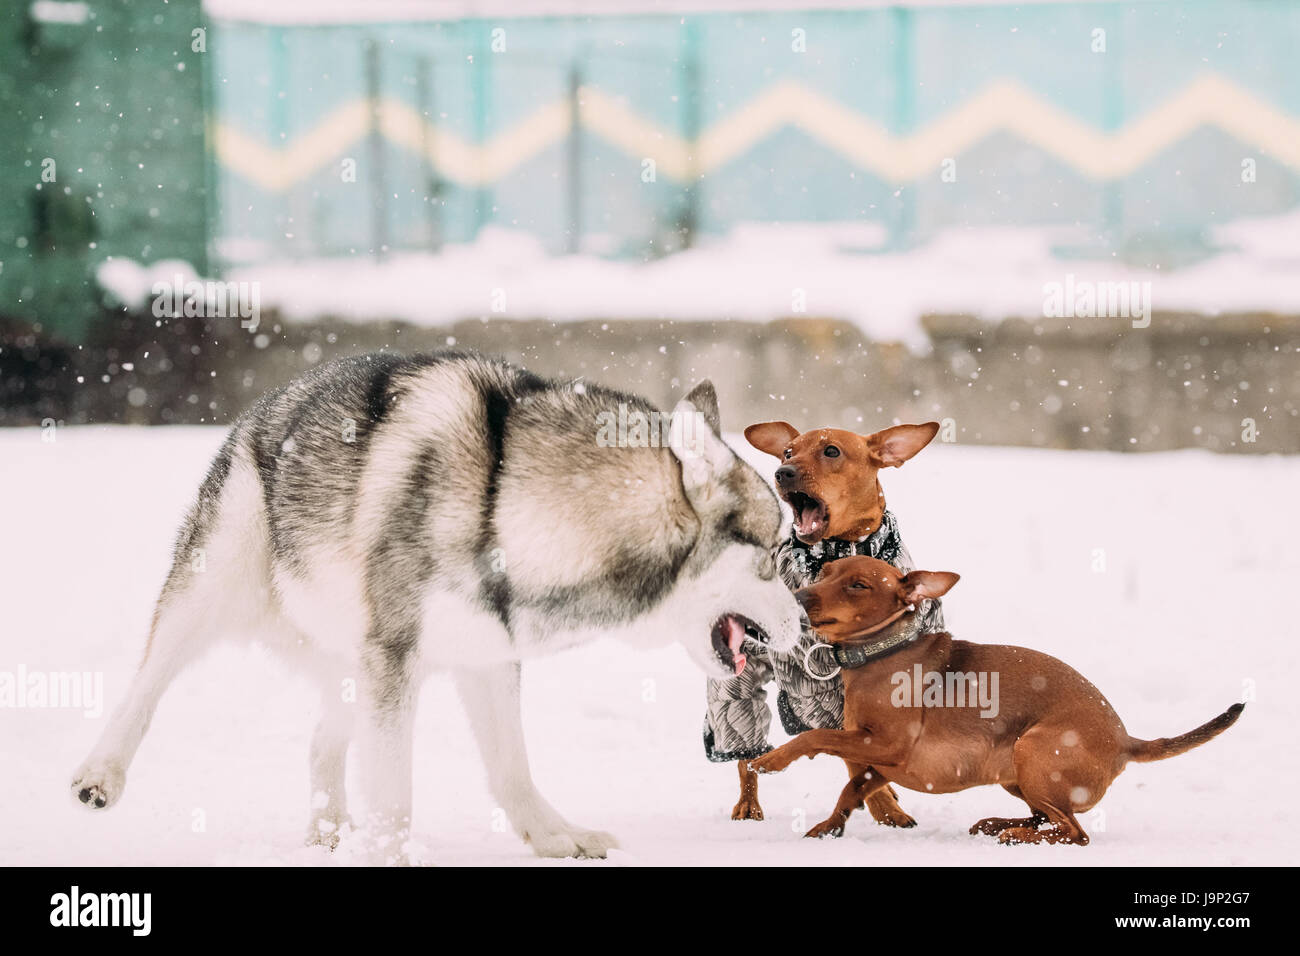 Funny Dogs Play Together. Funny Dog Red Brown Miniature Pinschers Pincher Min Pin And Husky Playing Outdoor In Snow, Winter Season. Playful Pet Outdoo Stock Photo